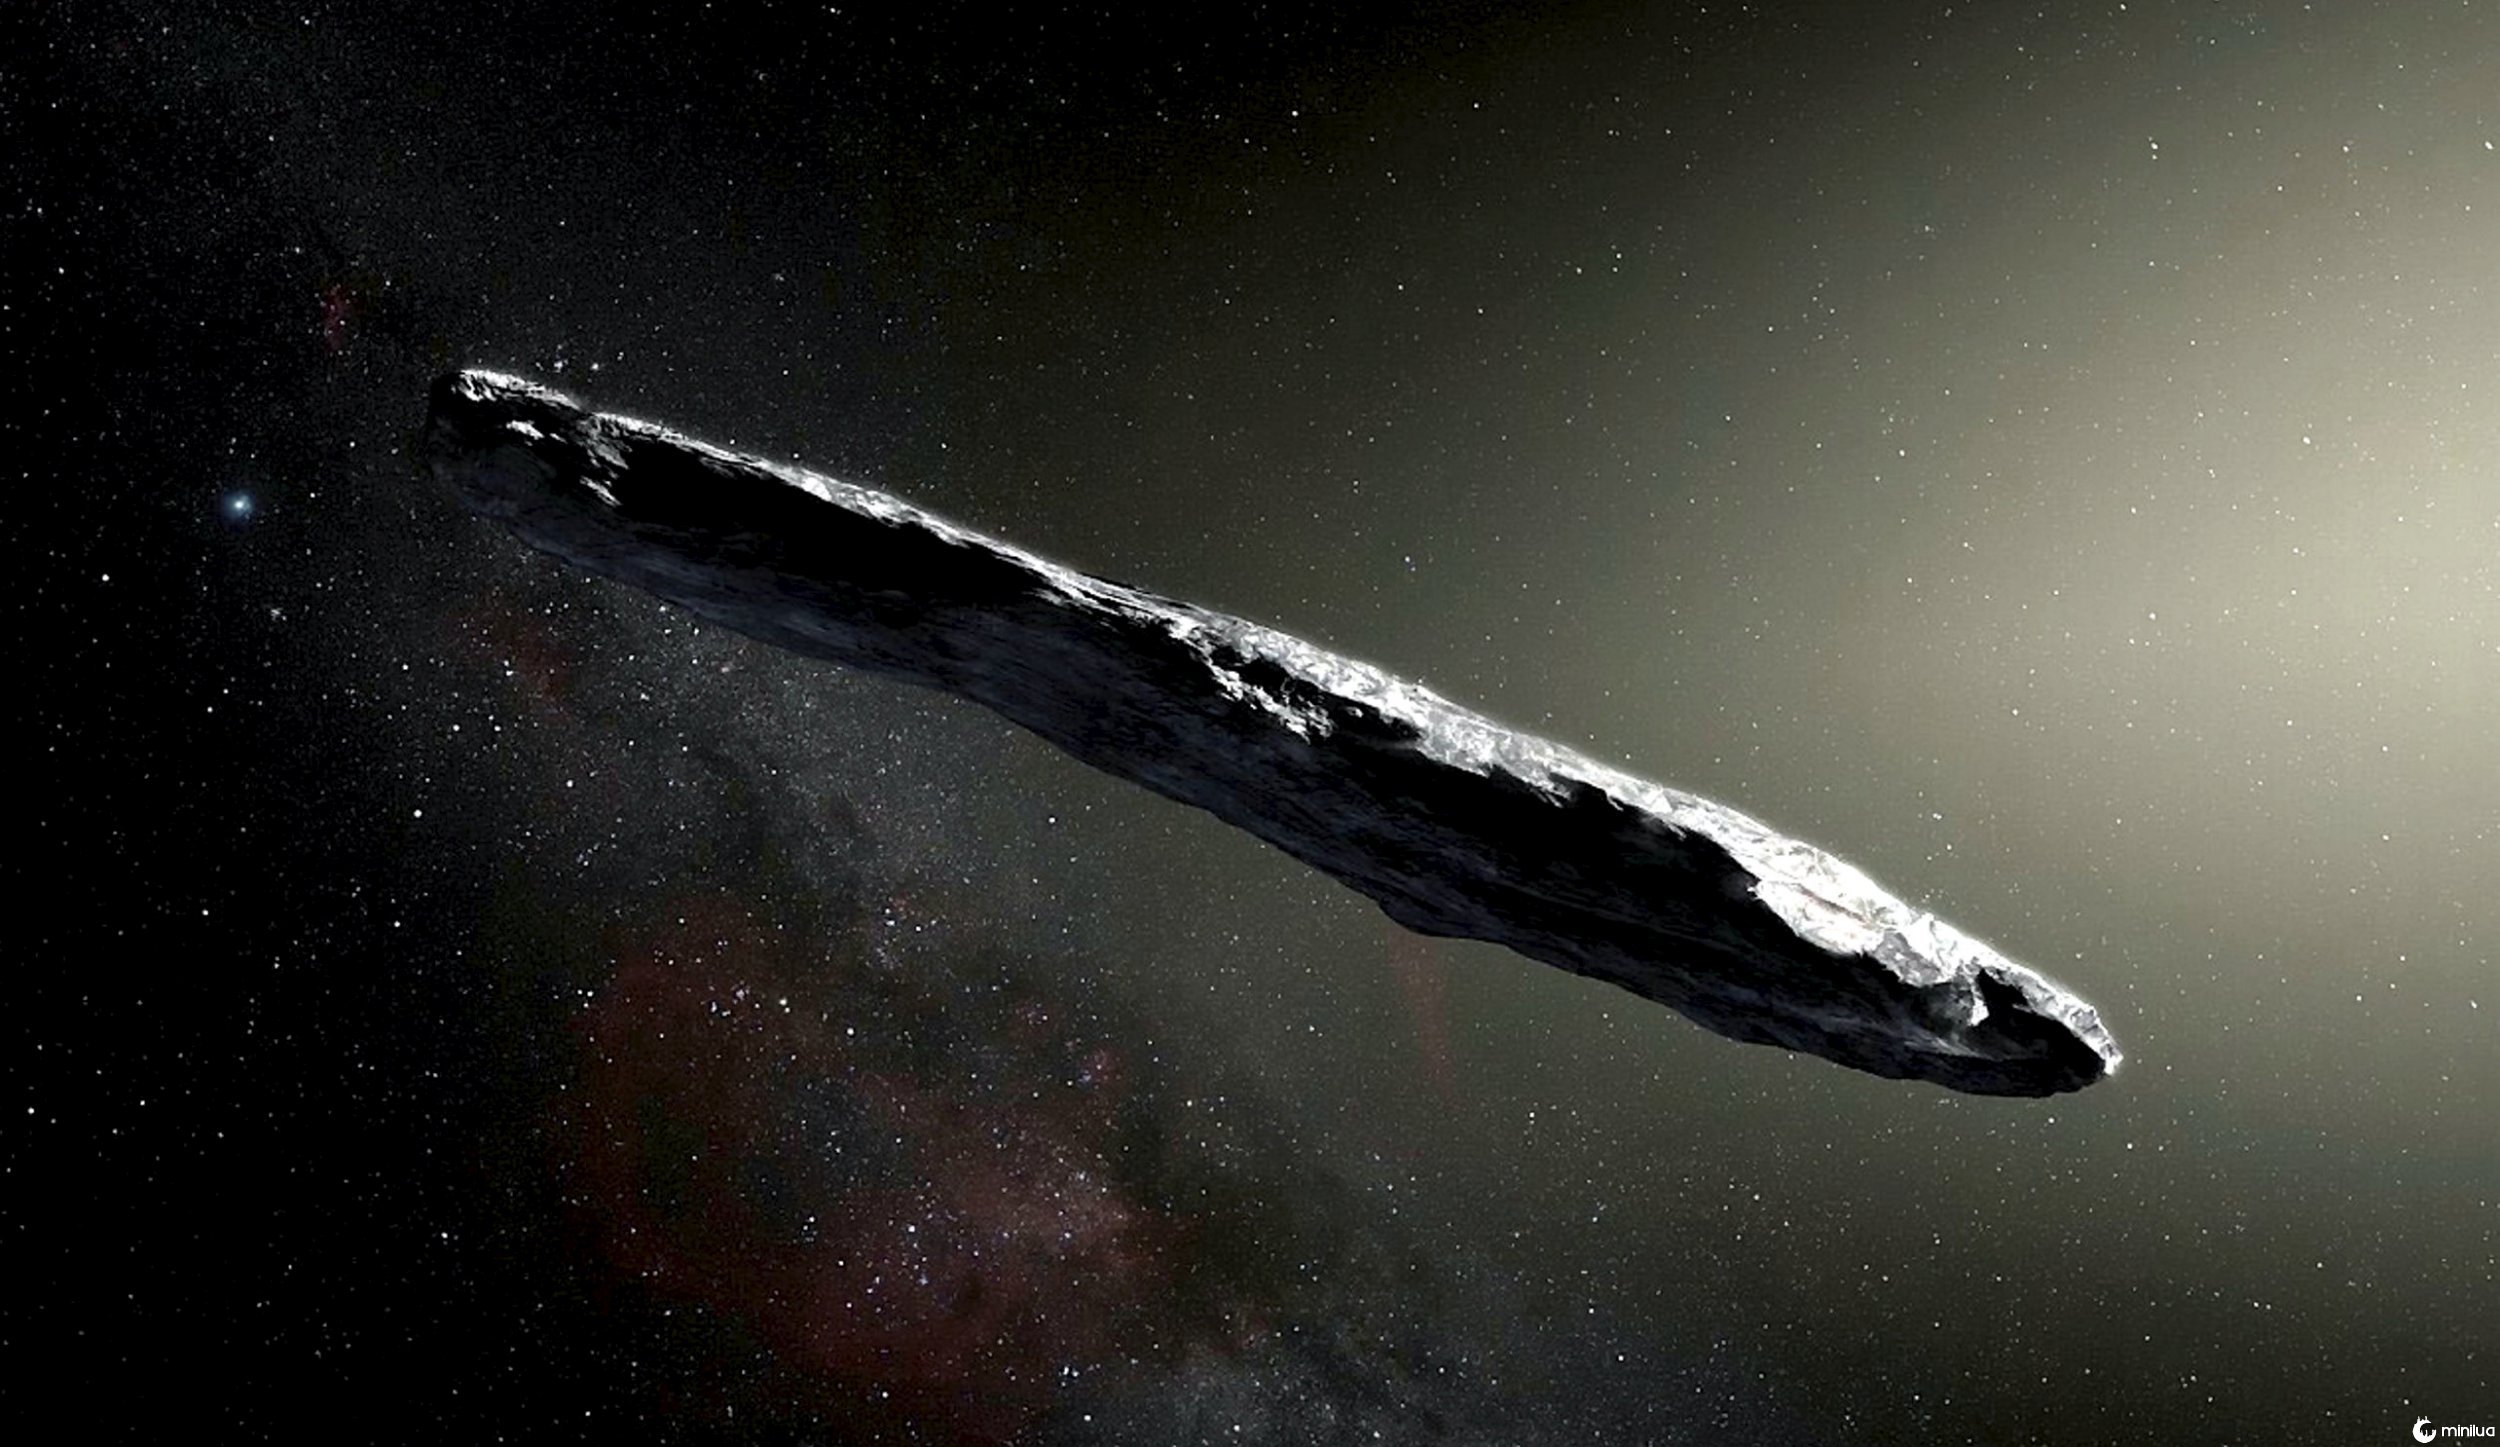 EMBARGOED until 1 July 2019 4pm BST (11:00 am ET) In this artist's concept, the interstellar object 'Oumuamua is depicted as a cigar-shaped body. A new analysis strongly suggests that 'Oumuamua has a natural origin and is not an alien spacecraft. See National News story NNalien. The first interstellar object to enter the solar system is not an alien spaceship but is still 'weird' and remains a mystery, astronomers said in a new study. It is the first known object to pass through solar system from outside, but experts have failed to explain where the object, called 'Oumuamua' came from. The mysterious cigar-shaped projectile - formally named the object 1I/2017 U1 - defies description with characteristics resembling both a comet and an asteroid. Oumuamua, Hawaiian for Scout??? , spins like a coke bottle and accelerates like a comet, but without the gas jets often seen trailing them.